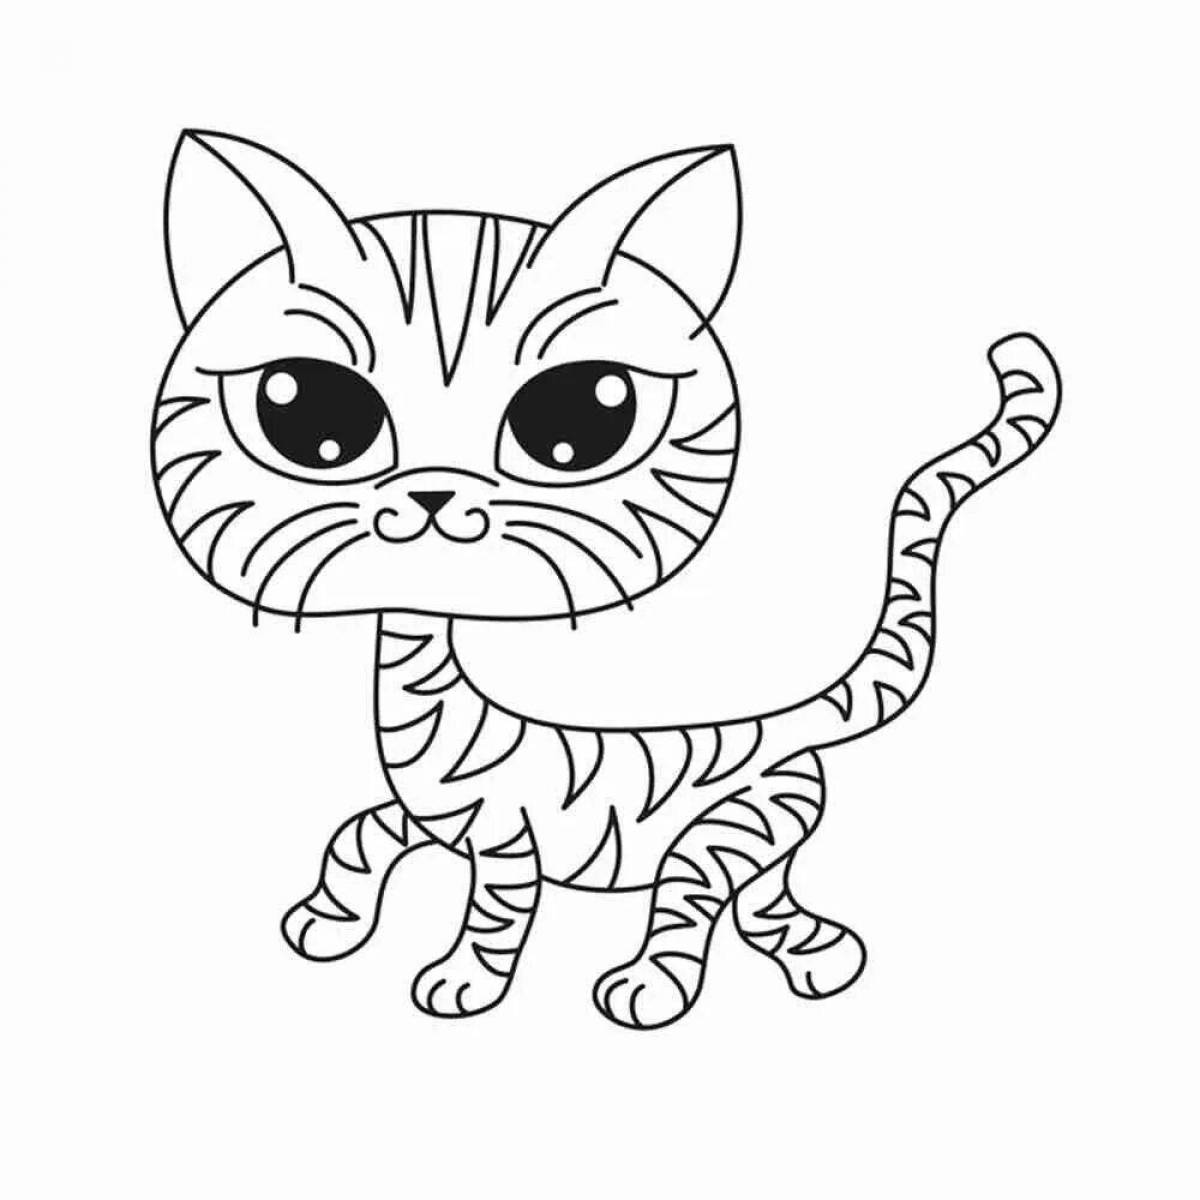 Bright coloring page r